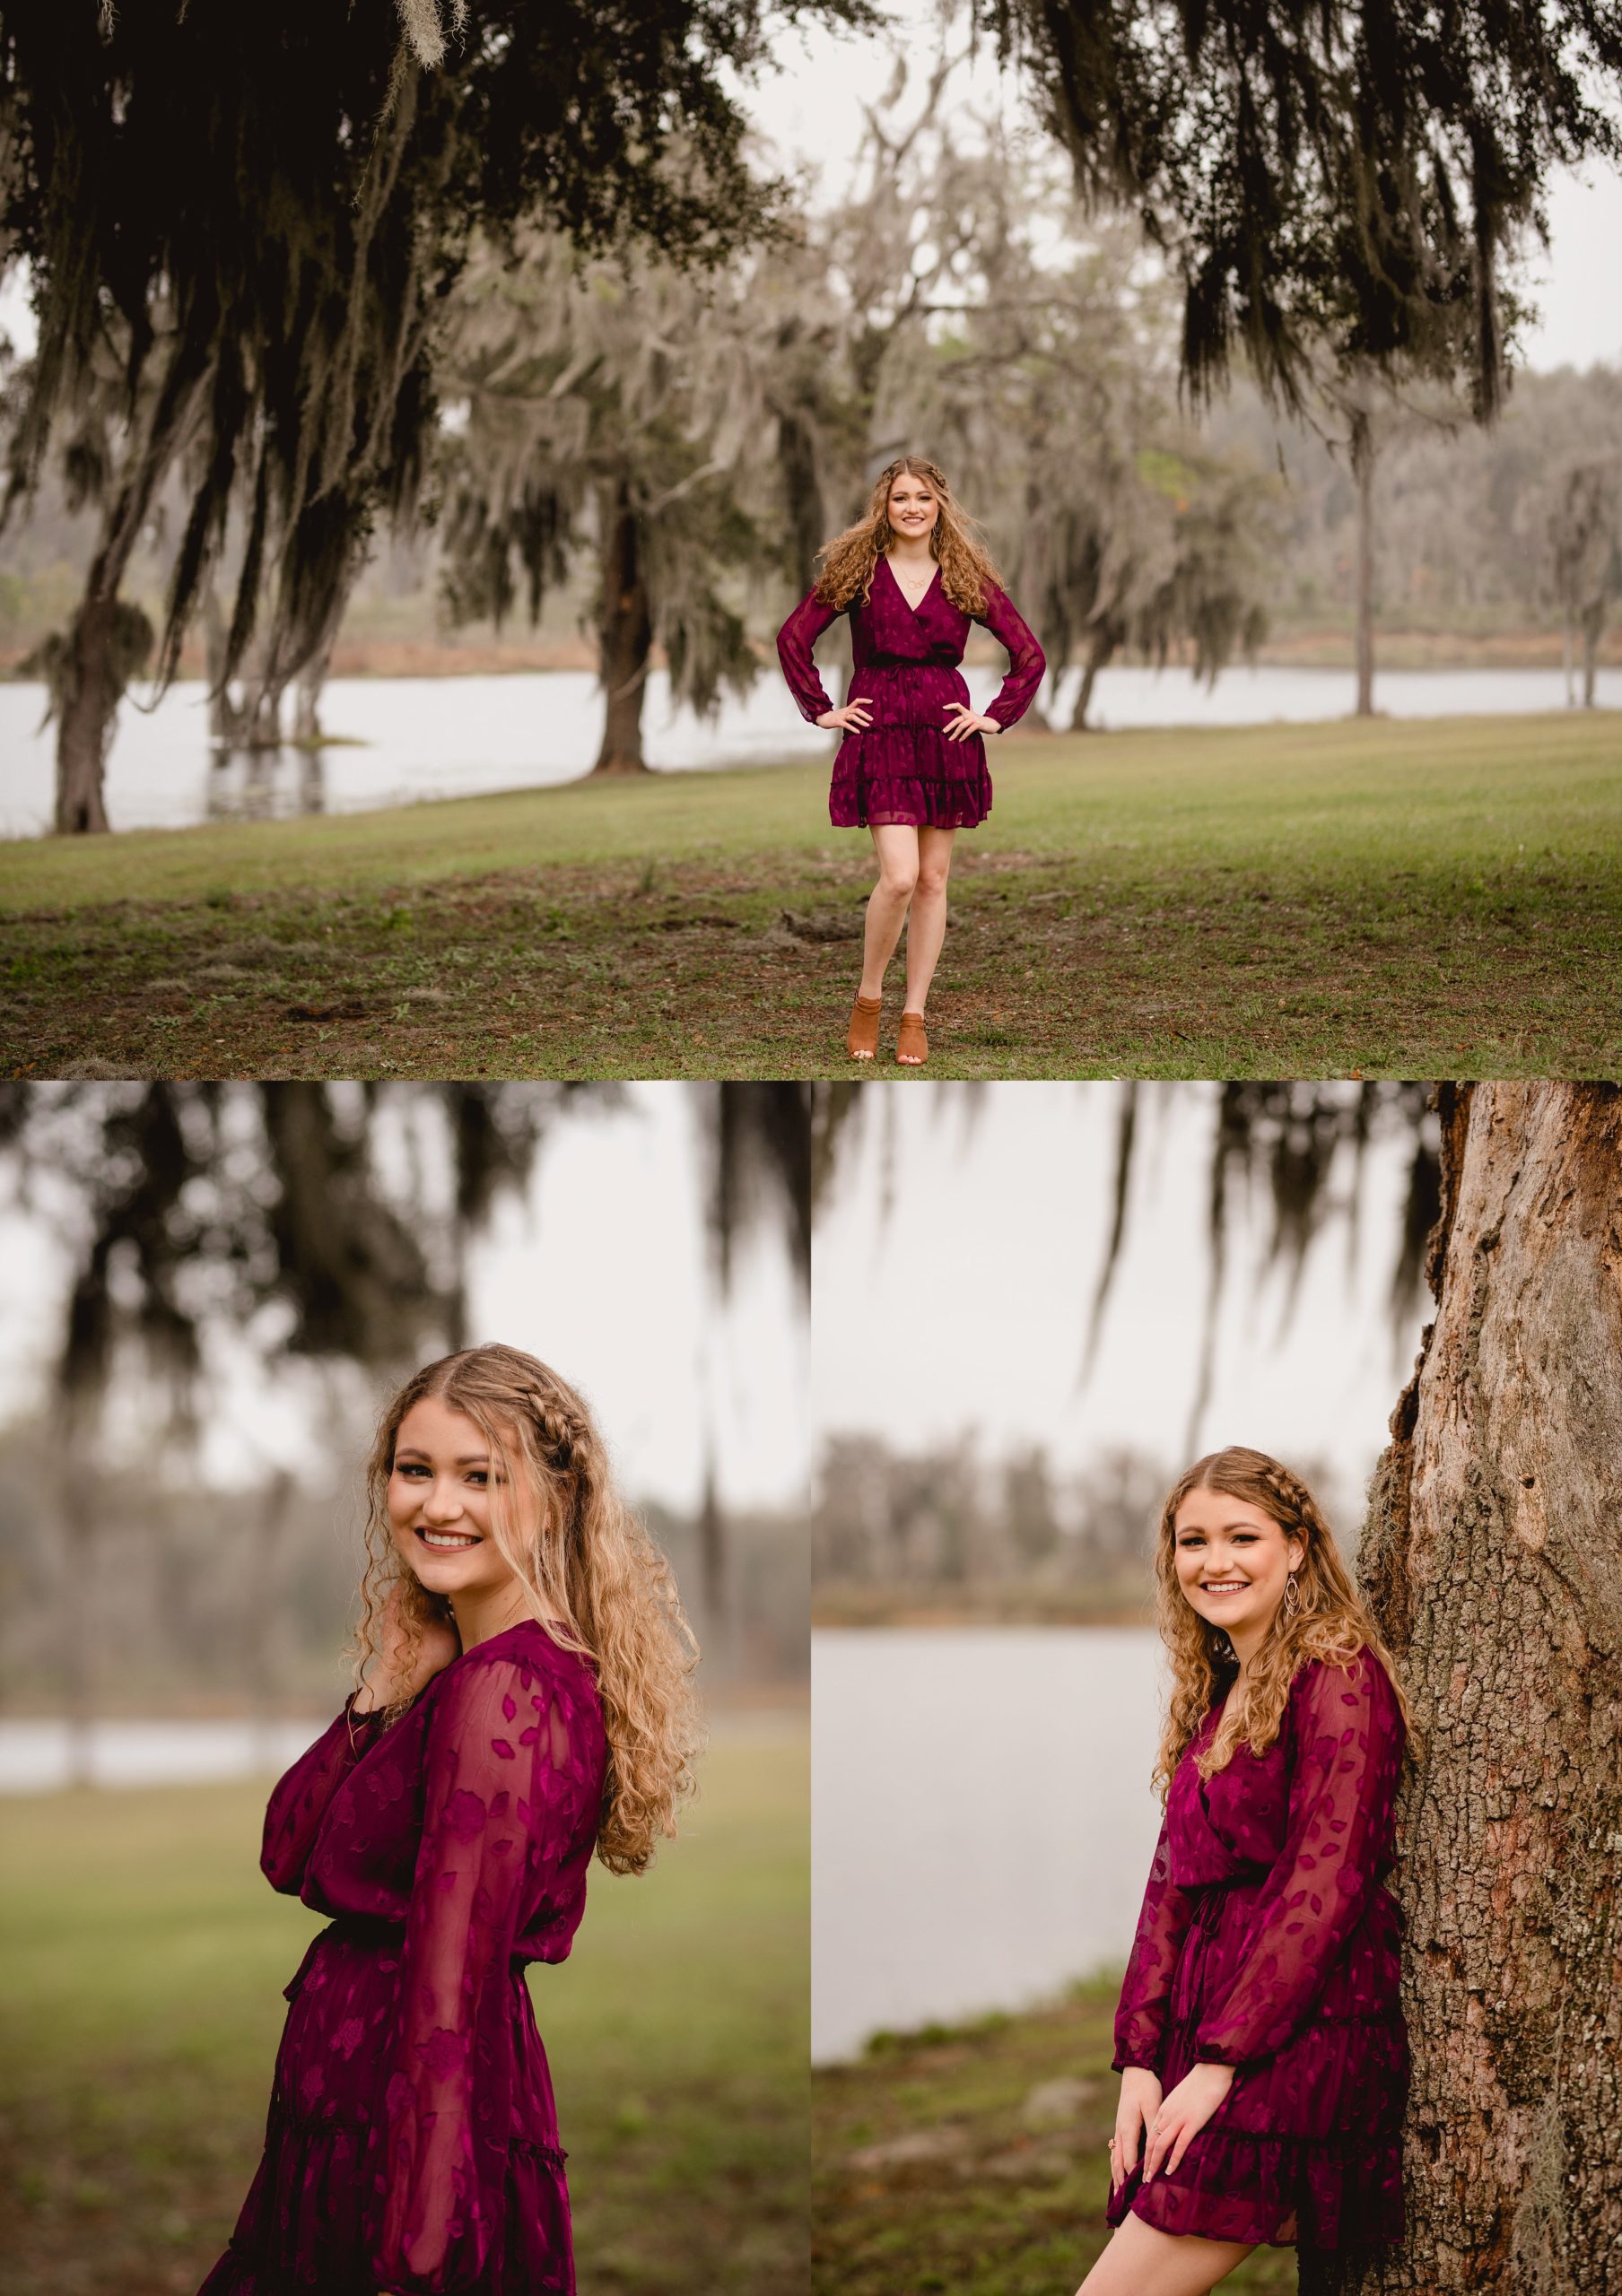 Senior pictures near a lake on a cloudy day in Fl